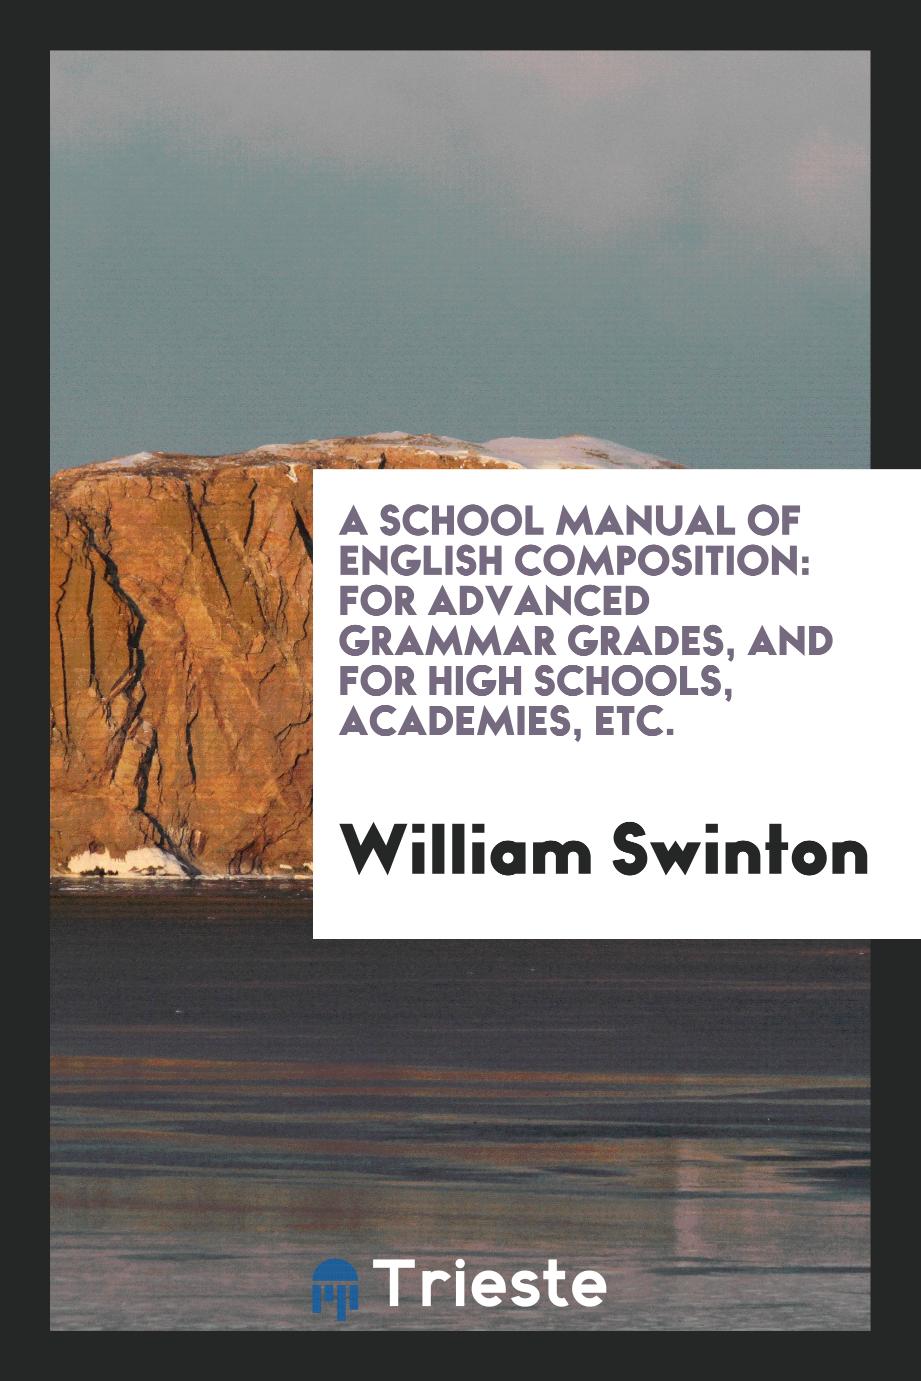 A School Manual of English Composition: For Advanced Grammar Grades, and for High Schools, Academies, Etc.